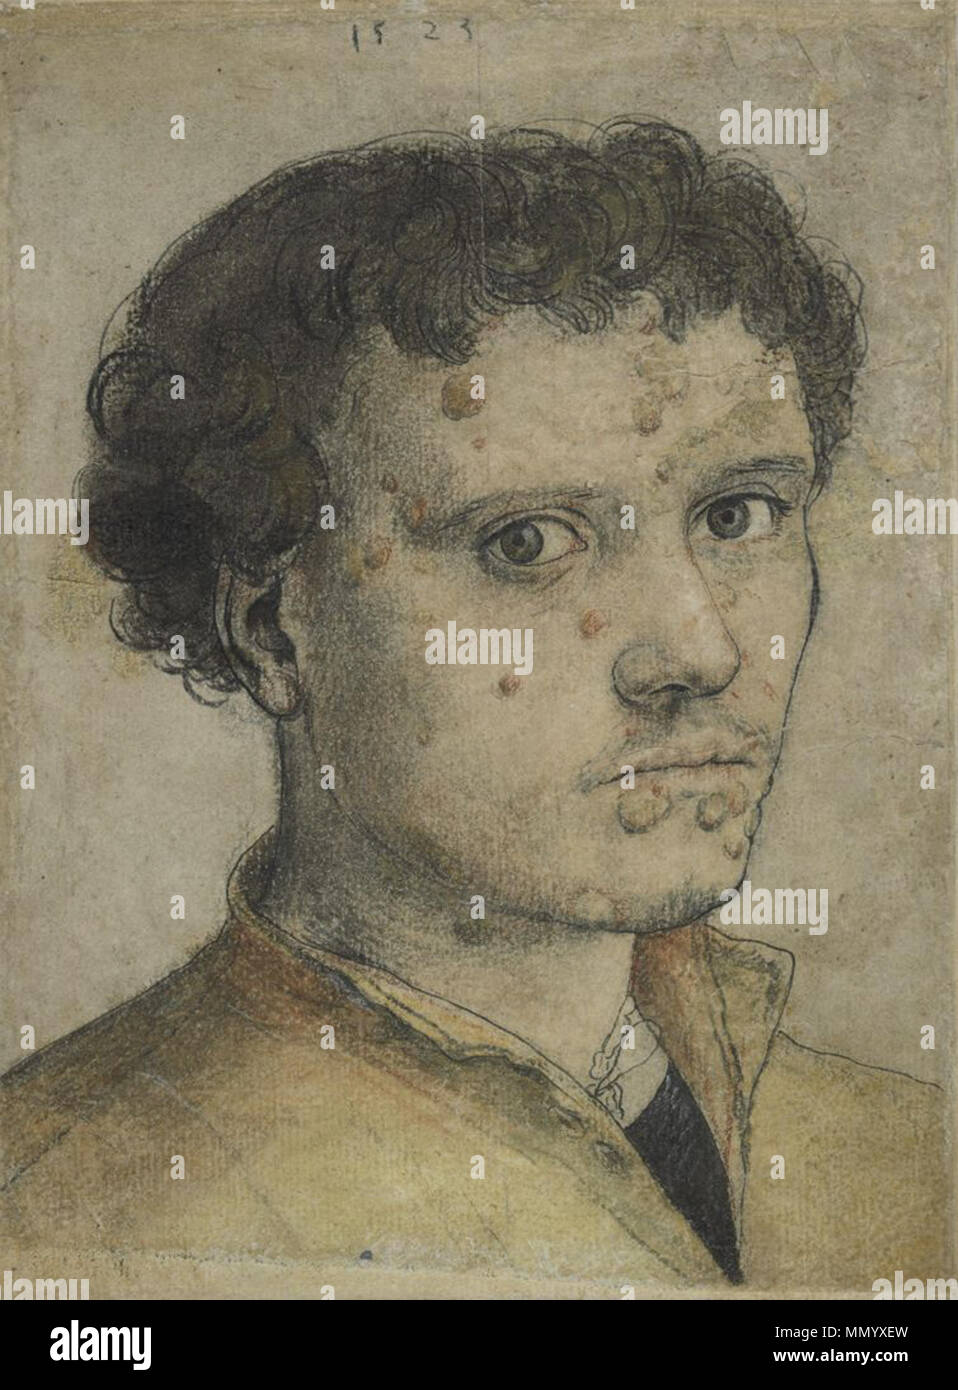 . English: Head of a Young Man, 20.5 x 15.2 cm (8 1/16 x 6 in.), drawing, 1523, black and gray ink and black, red, yellow, and white chalk, stumped, on cream antique laid paper, heavily restored. Fogg Museum, 1949.2  . 1523.   Hans Holbein  (1497/1498–1543)       Alternative names Hans Holbein der Jüngere, Hans Holbein  Description German painter and draughtsman  Date of birth/death 1497 or 1498 between 7 October 1543 and 29 November 1543  Location of birth/death Augsburg London  Work location Basel (1515-1526), Lucerne (1515-1526), Venice (1515), Bologna (1515), Florence (1515), Rome (1515),  Stock Photo